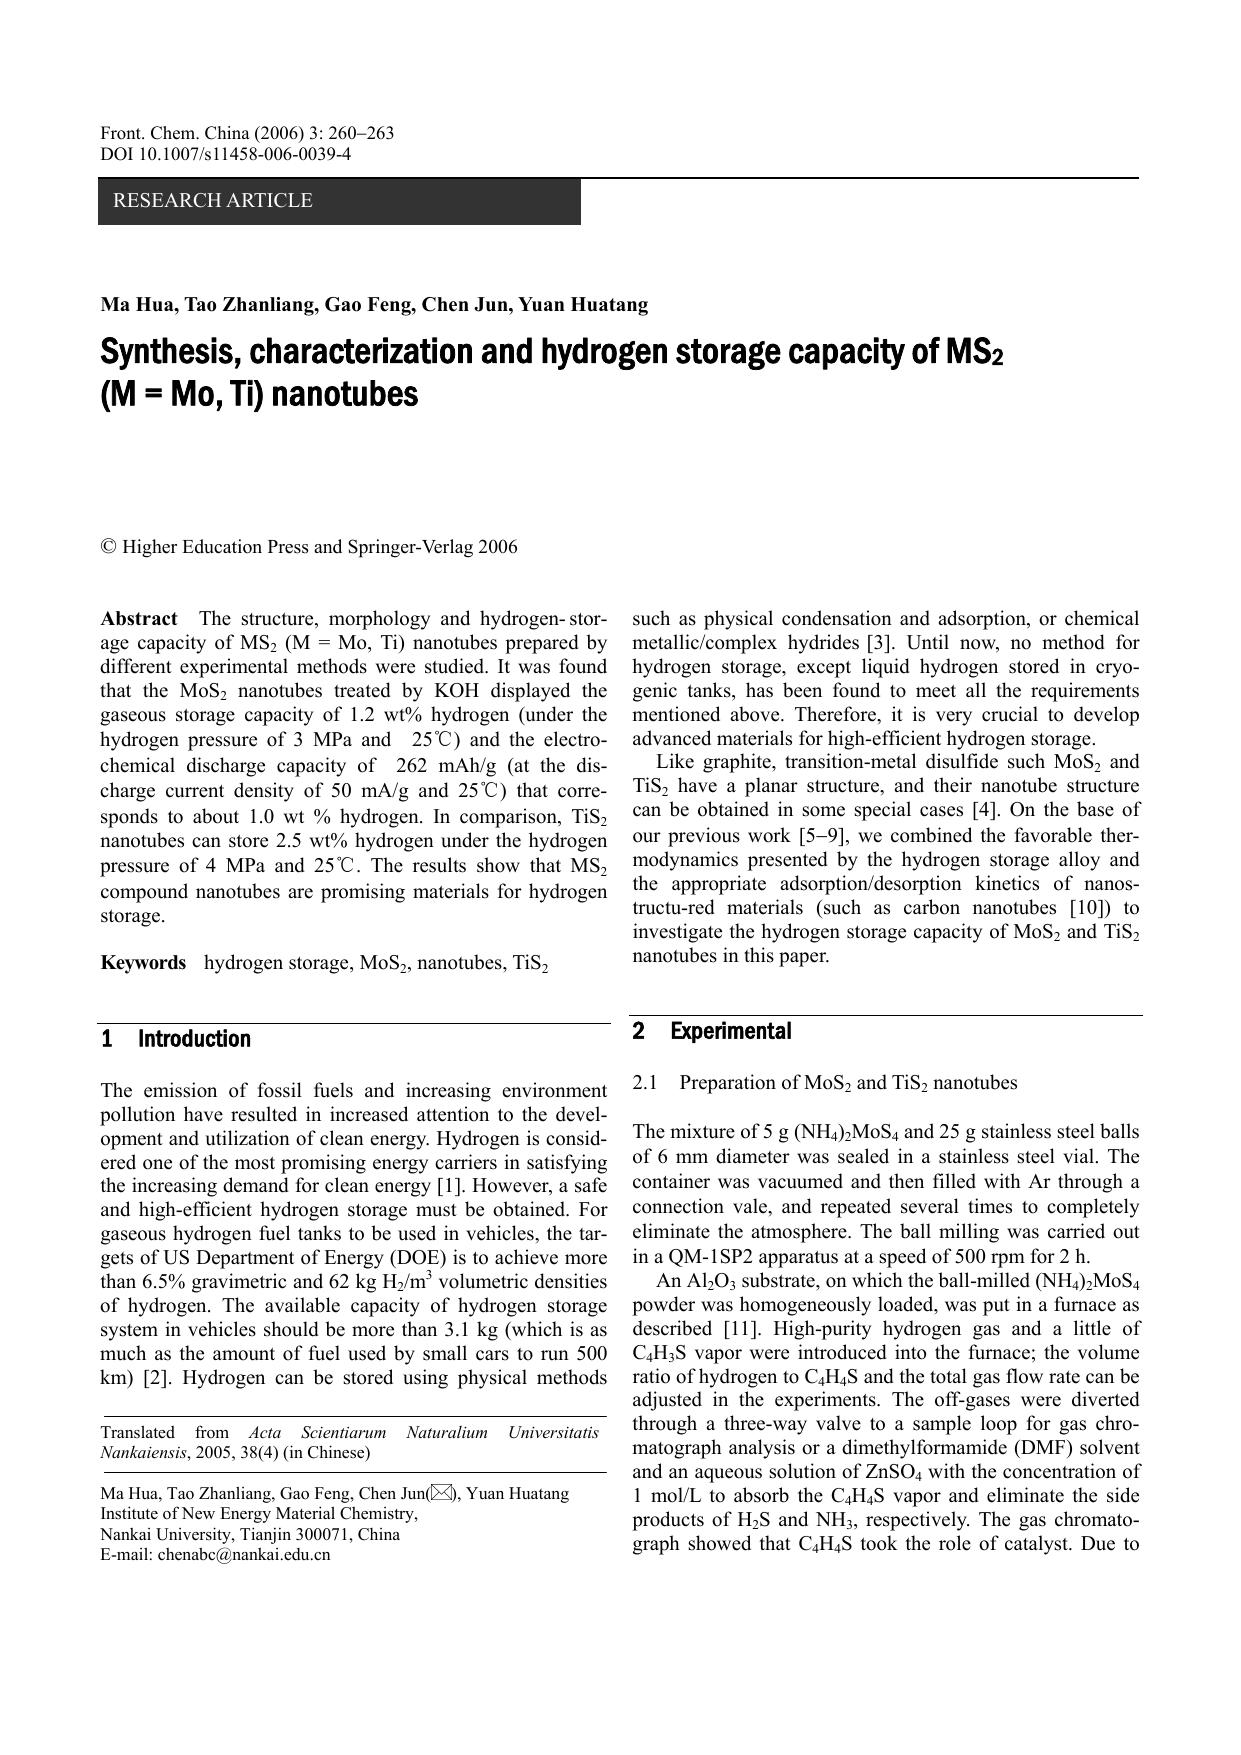 Synthesis, characterization and hydrogen storage capacity of MS<Subscript>2<Subscript> (M = Mo, Ti) nanotubes by Unknown